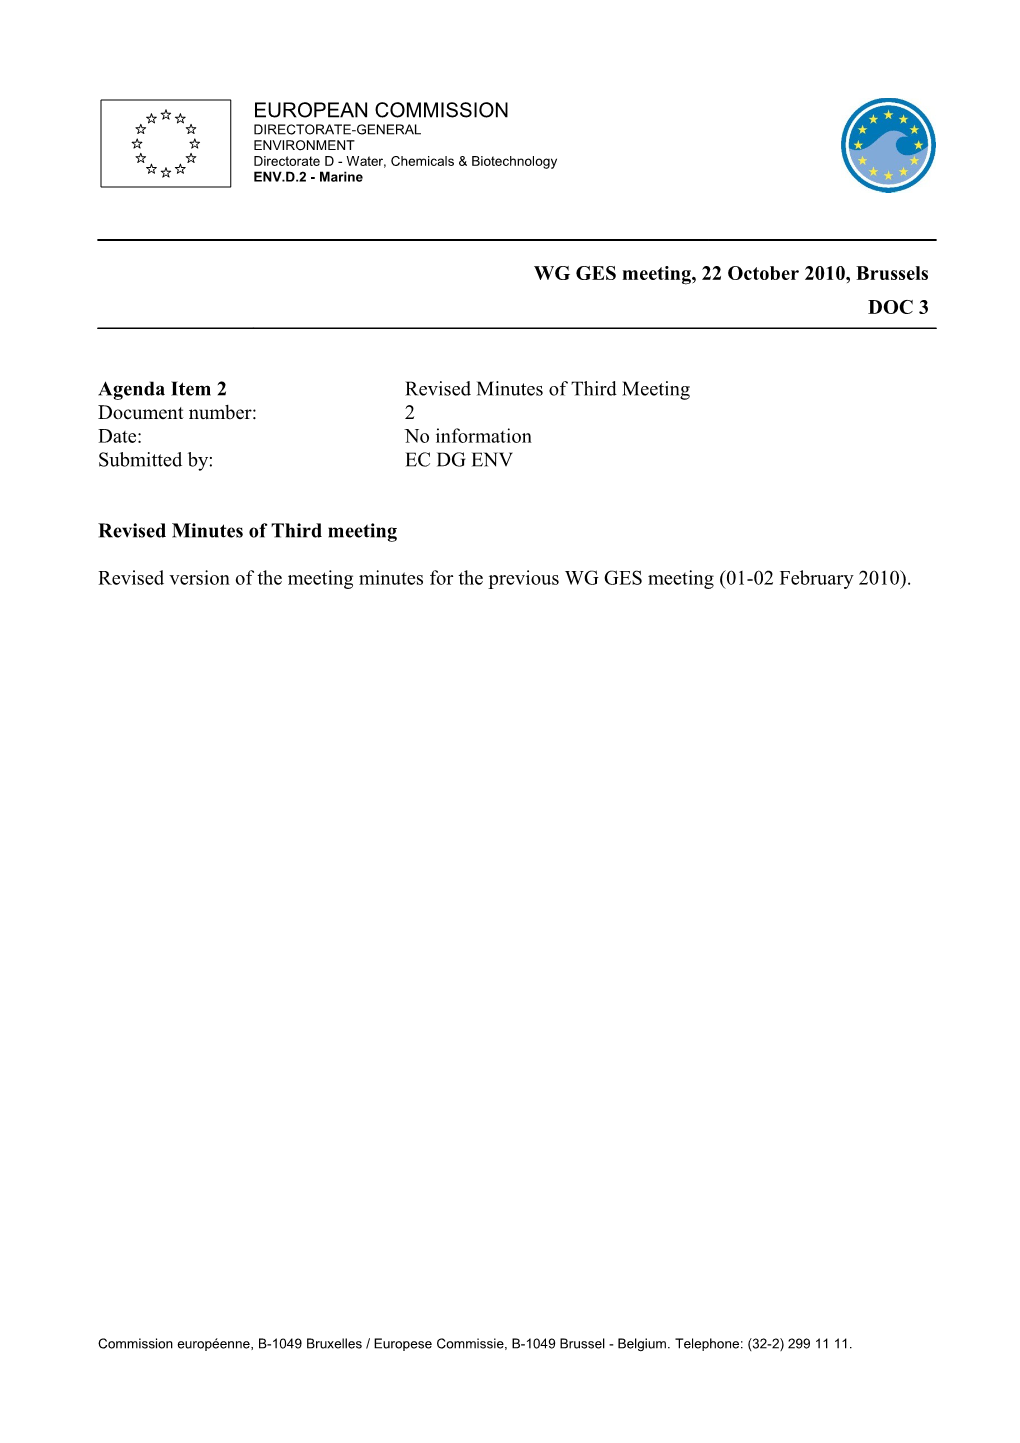 Revised Minutes of Third Meeting